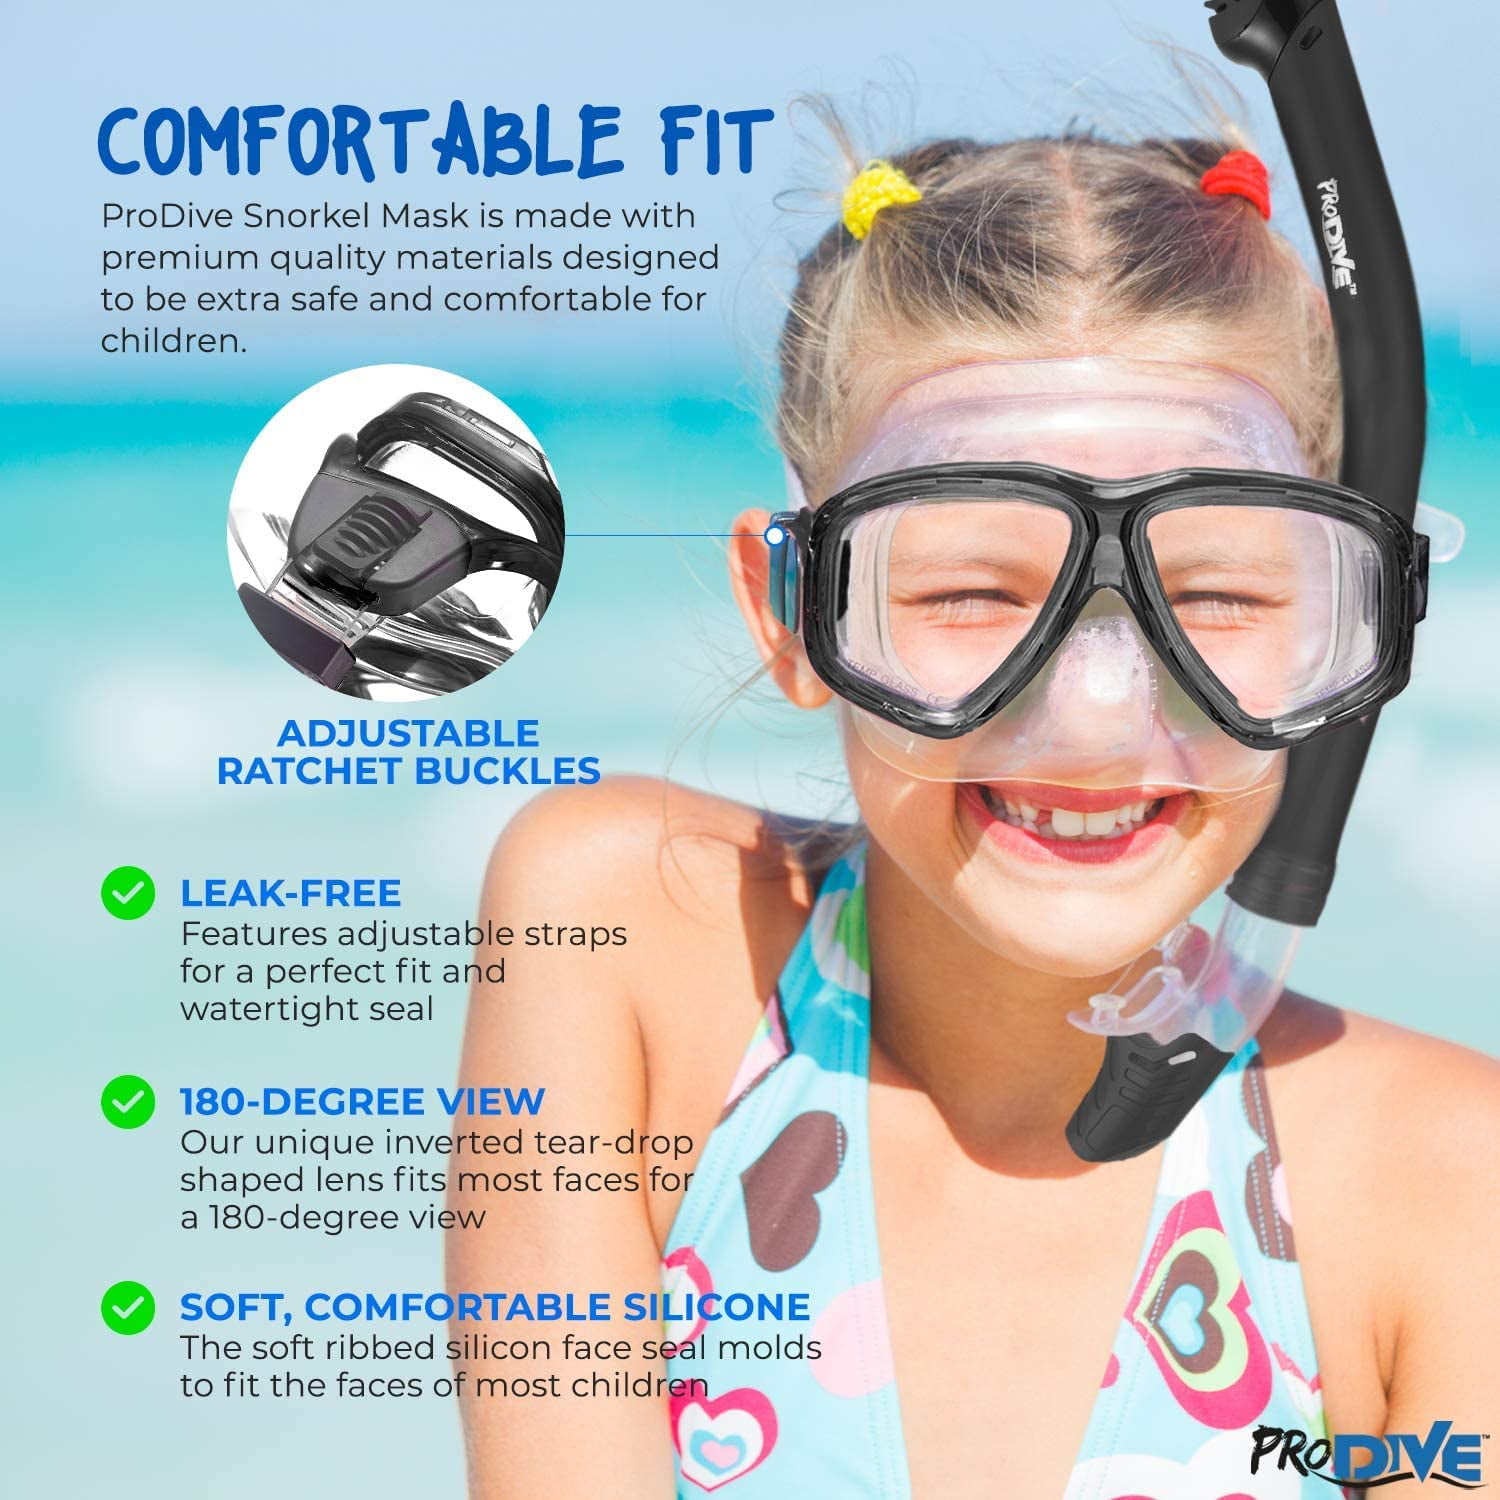 Prodive Premium Dry Top Snorkel Set - Impact Resistant Tempered Glass Diving Mask - Watertight and Anti-Fog Lens for Best Vision - Easy Adjustable Strap - Waterproof Gear Bag Included (Blue, Kids)